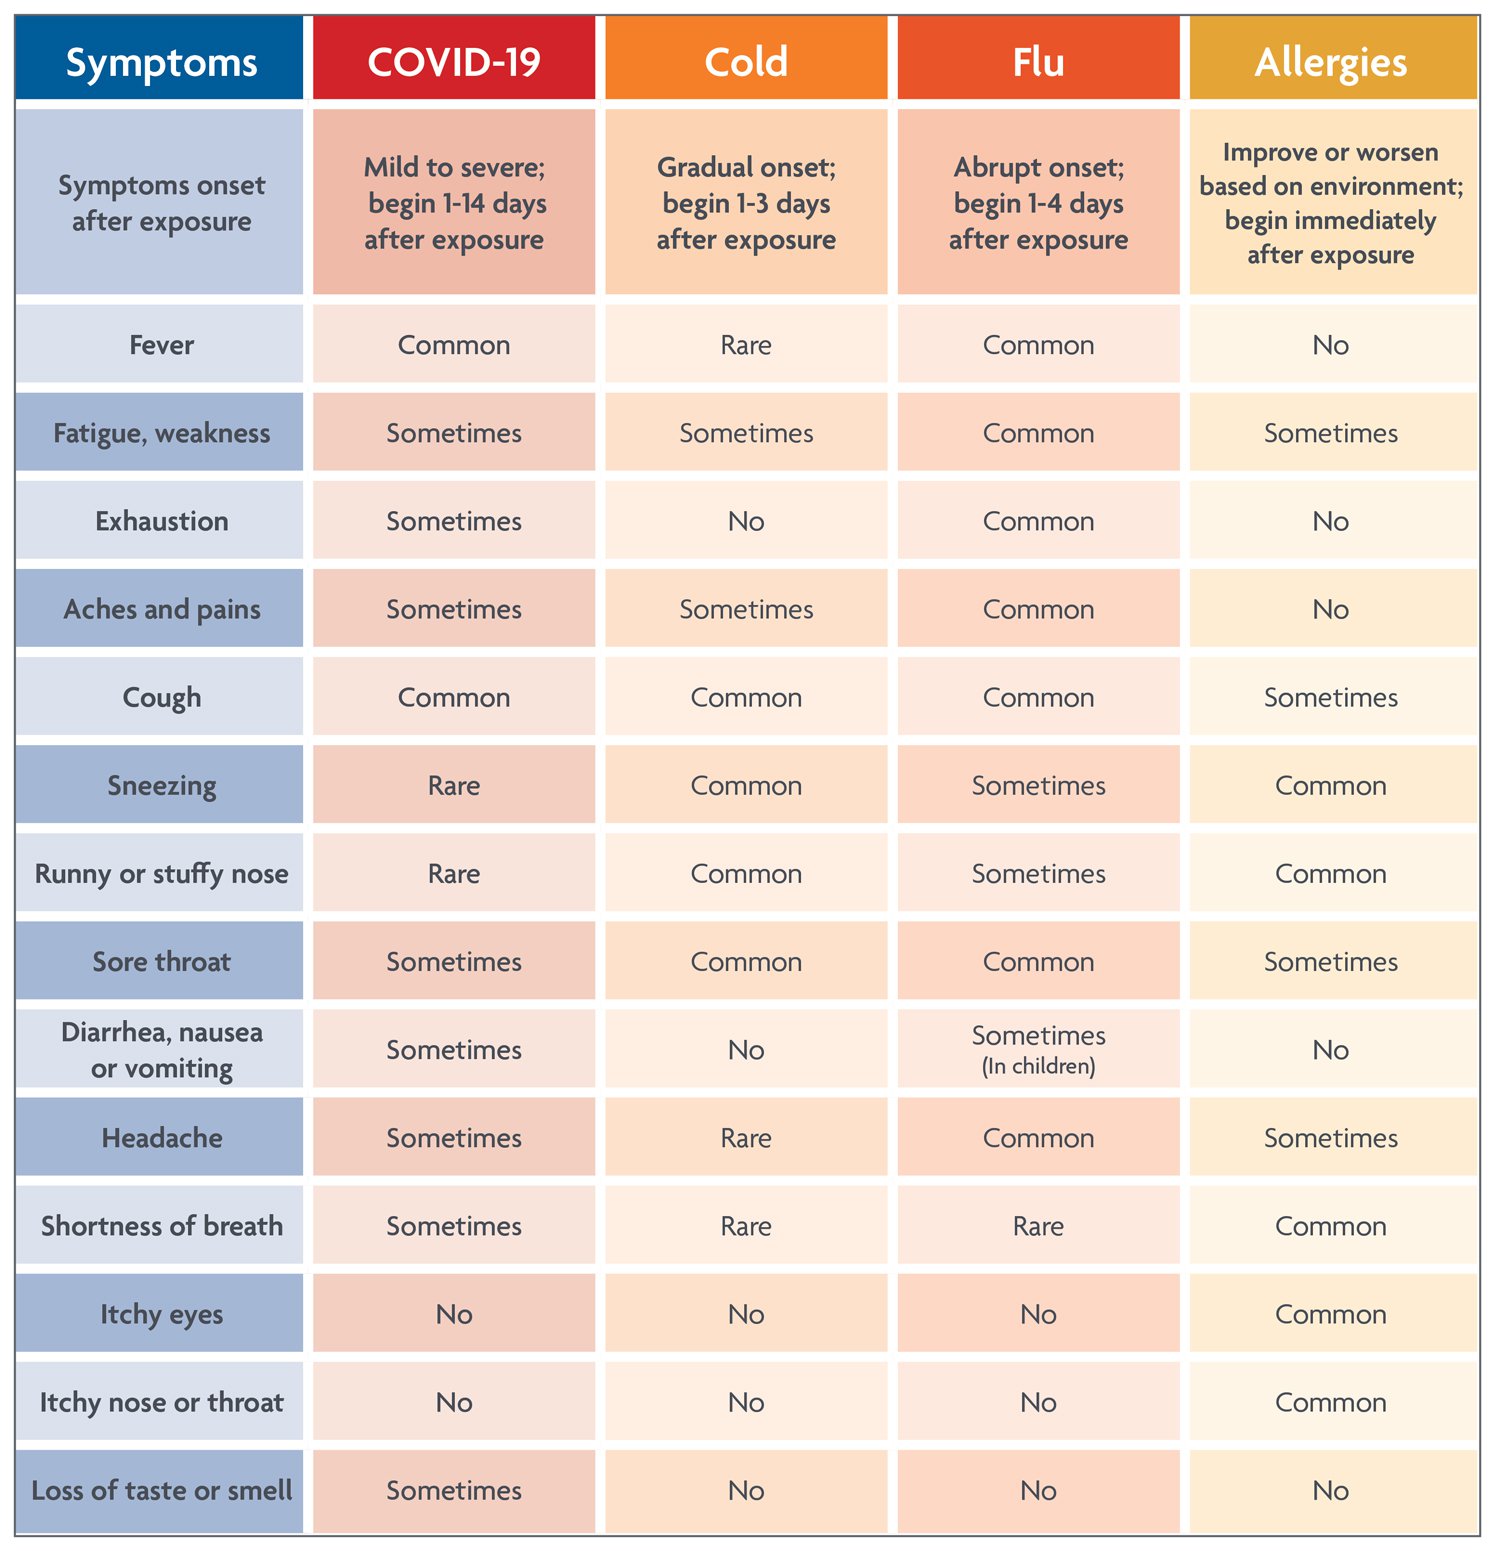 Symptom comparison chart with COVID-19, cold, flu and allergies symptoms.